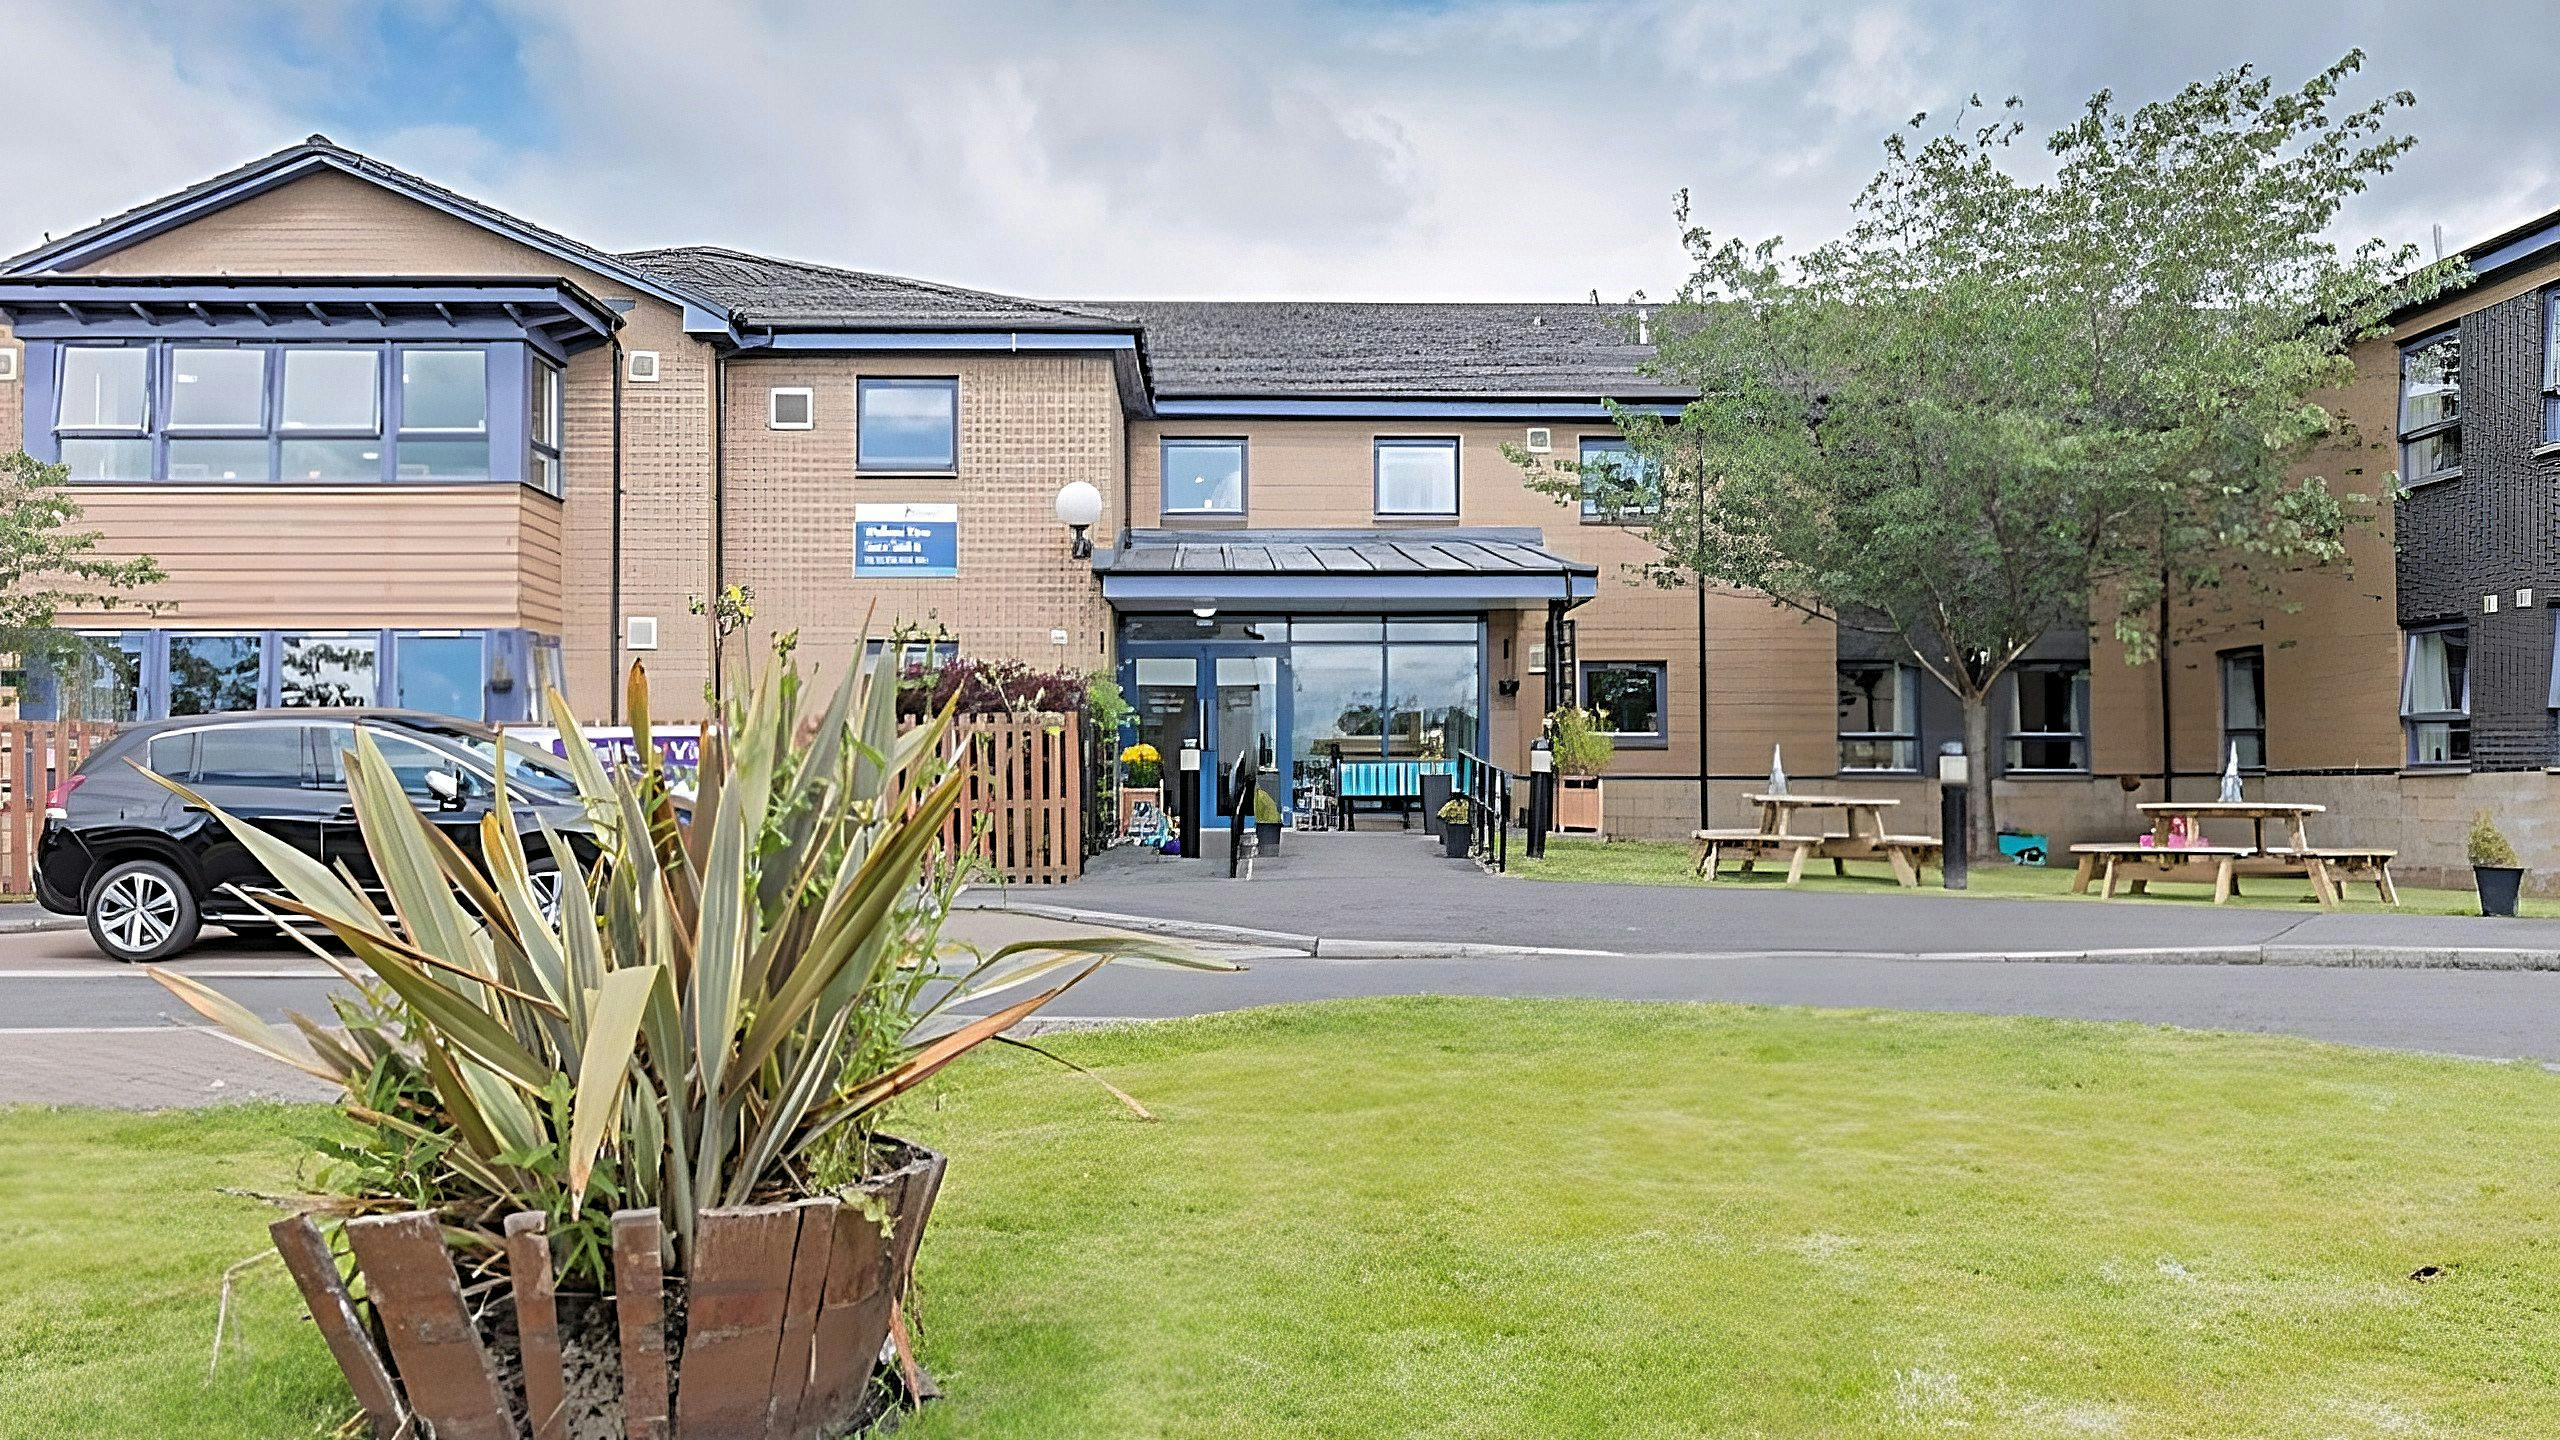 Countrywide - Wallace View care home 3